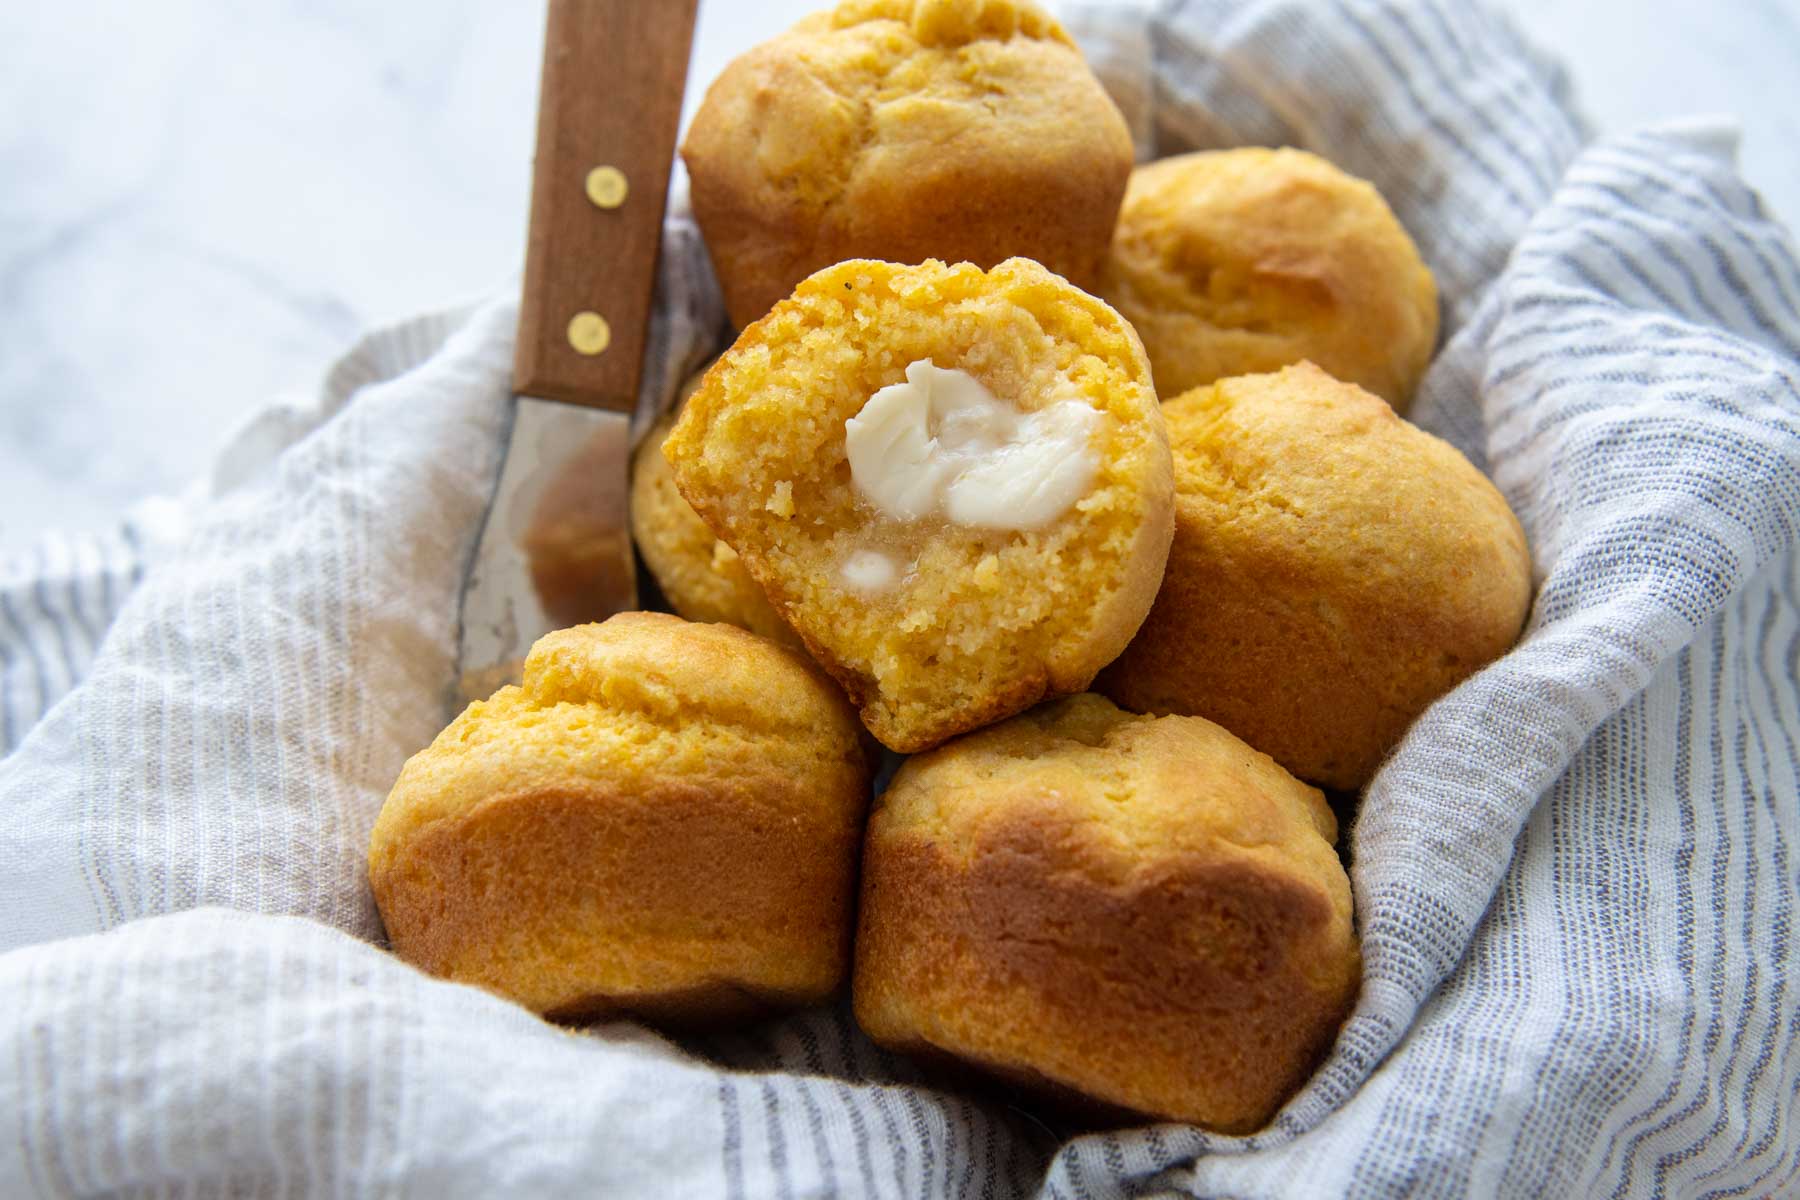 an open cornbread muffin with melting butter spread inside